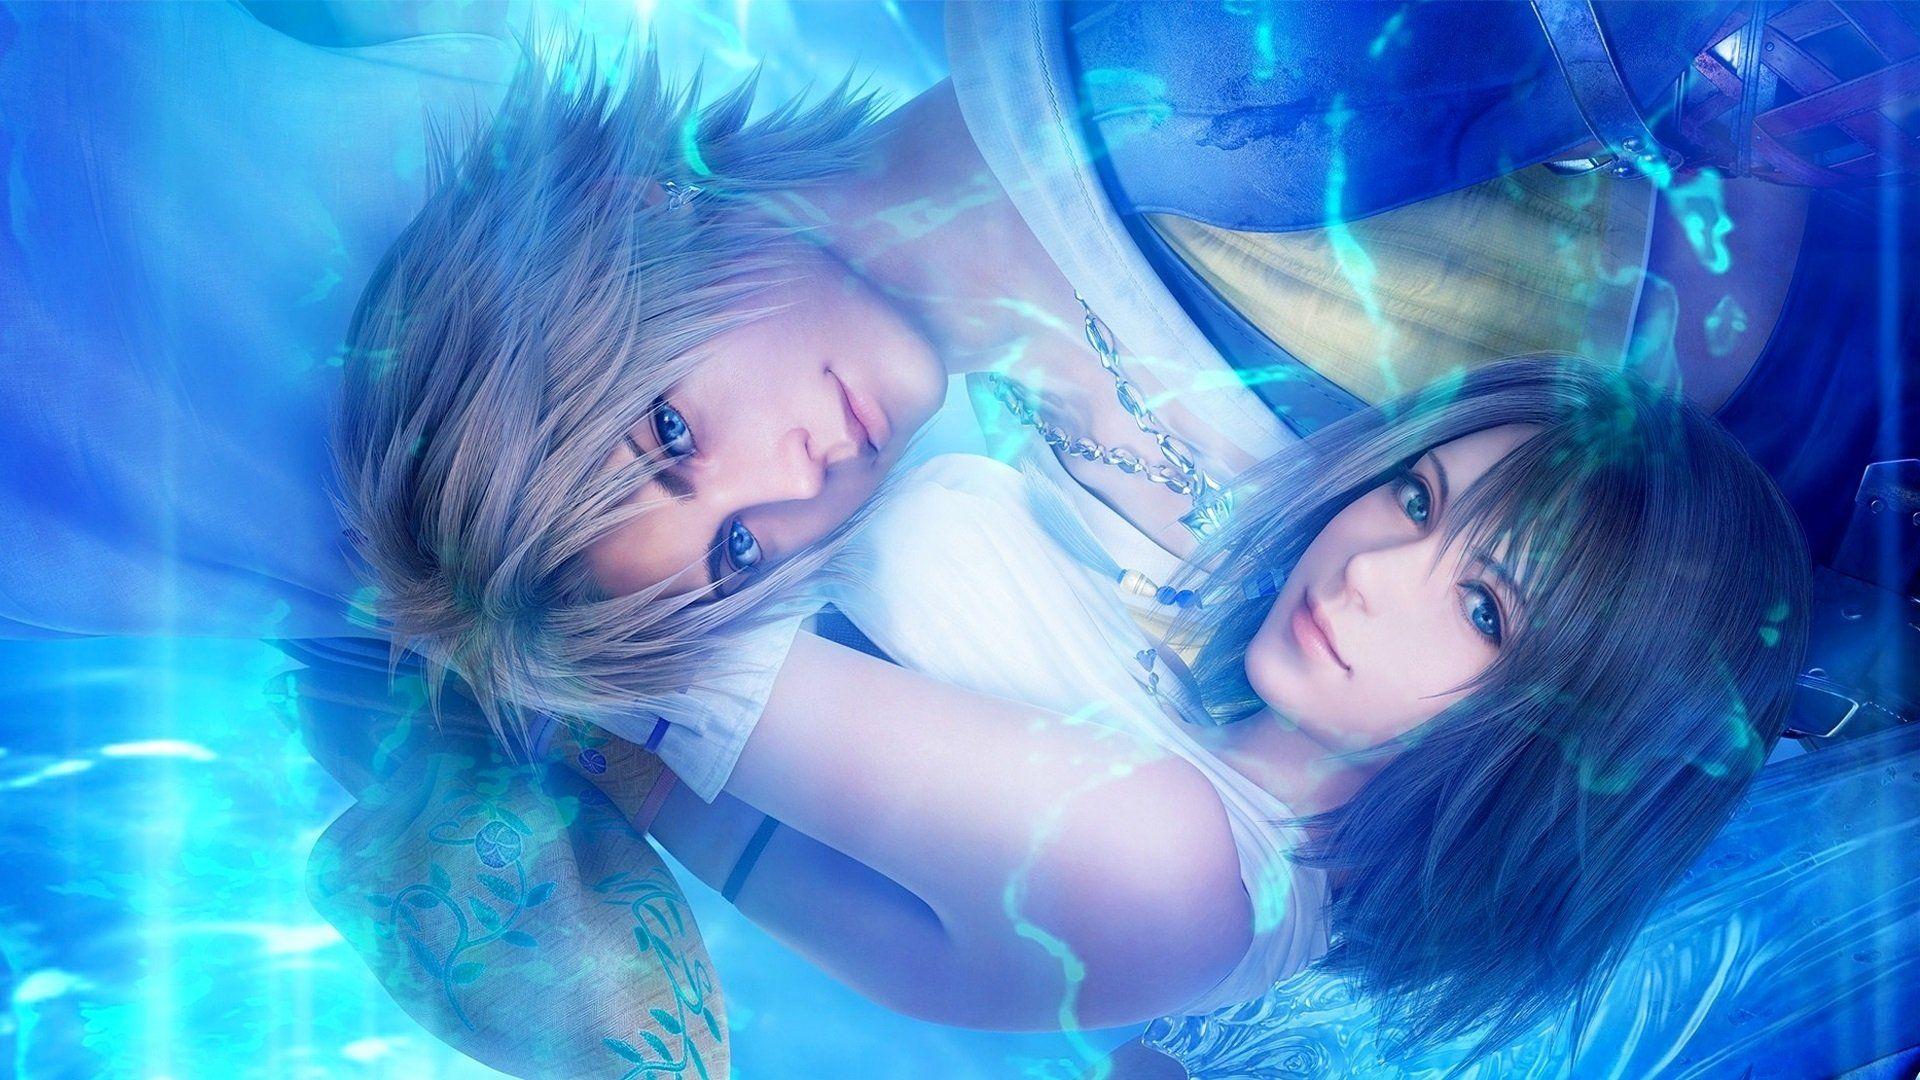 Final Fantasy X Full HD Wallpaper and Background Imagex1080